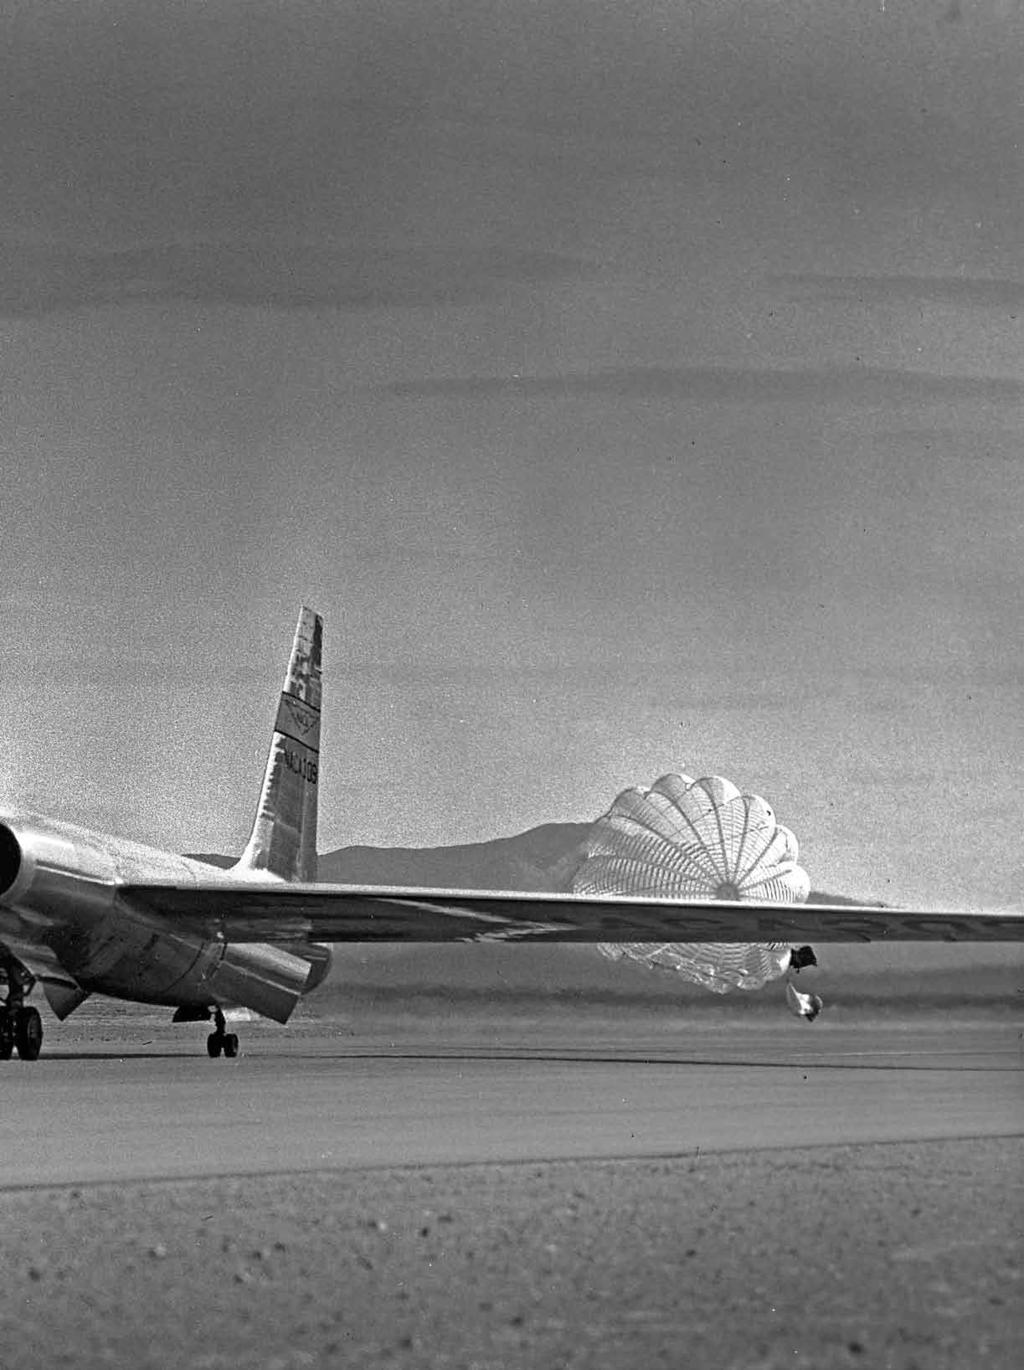 atone An early U-2 reconnaissance airplane, speed brakes and landing chute deployed, lands at Groom Lake, Nev., in the mid-1950s.